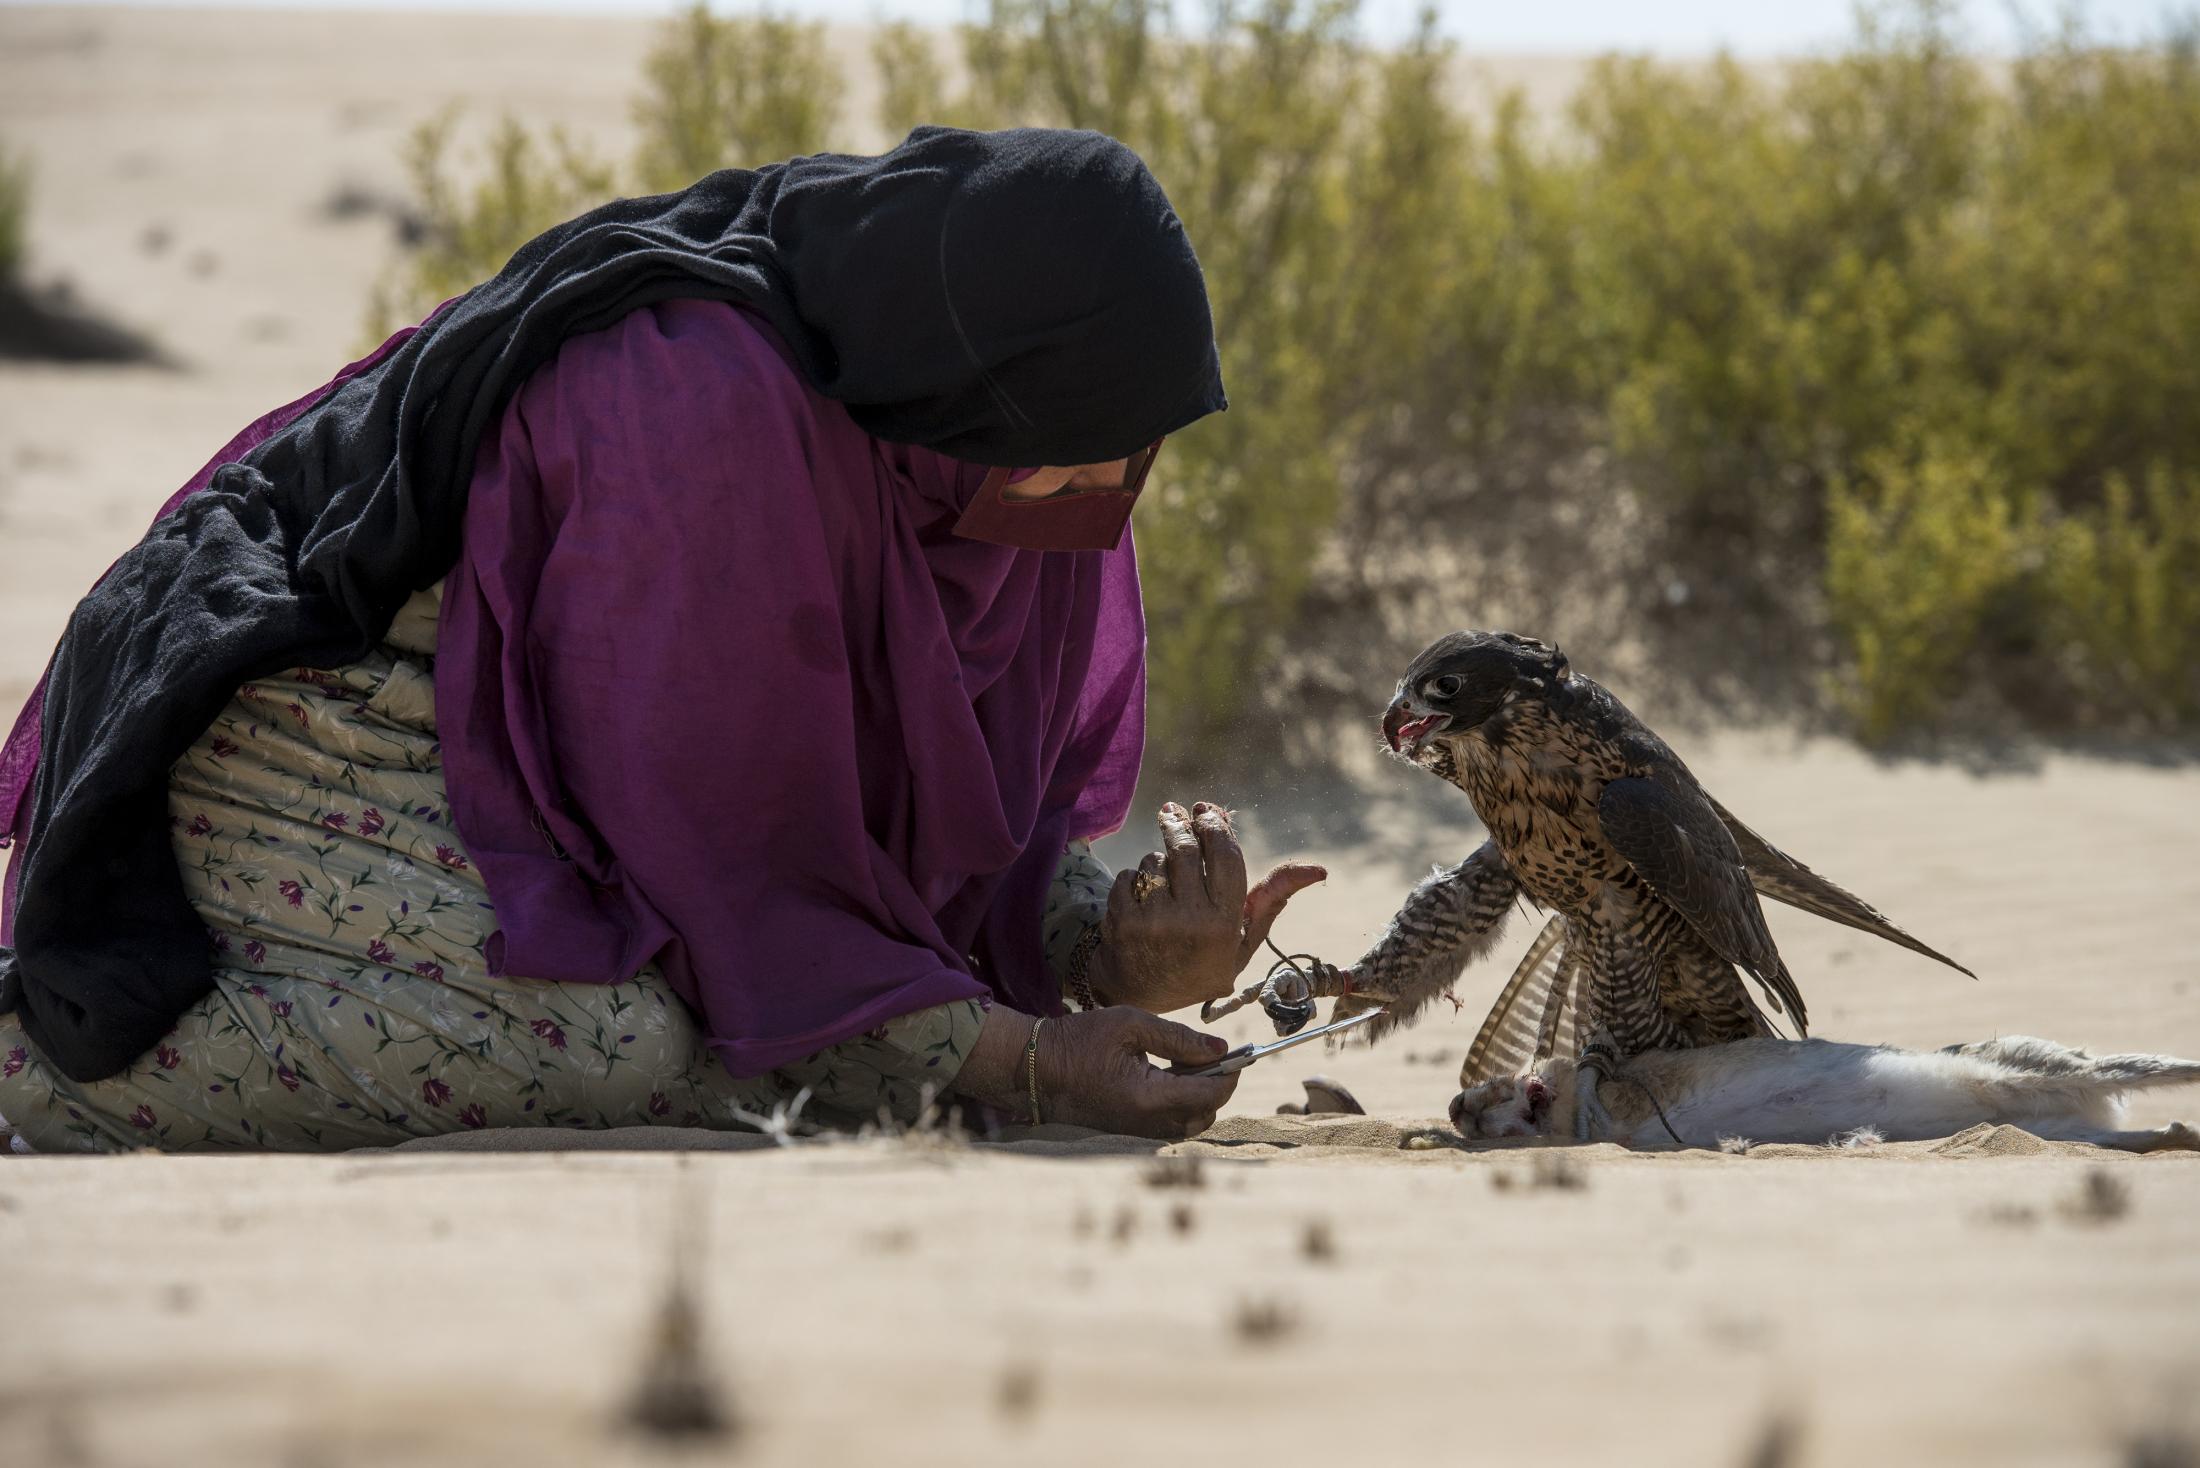 UAE : Women Breaking Stereotypes with Falconry -  Afrah with her falcon during a rabbit hunt. Falconry is...